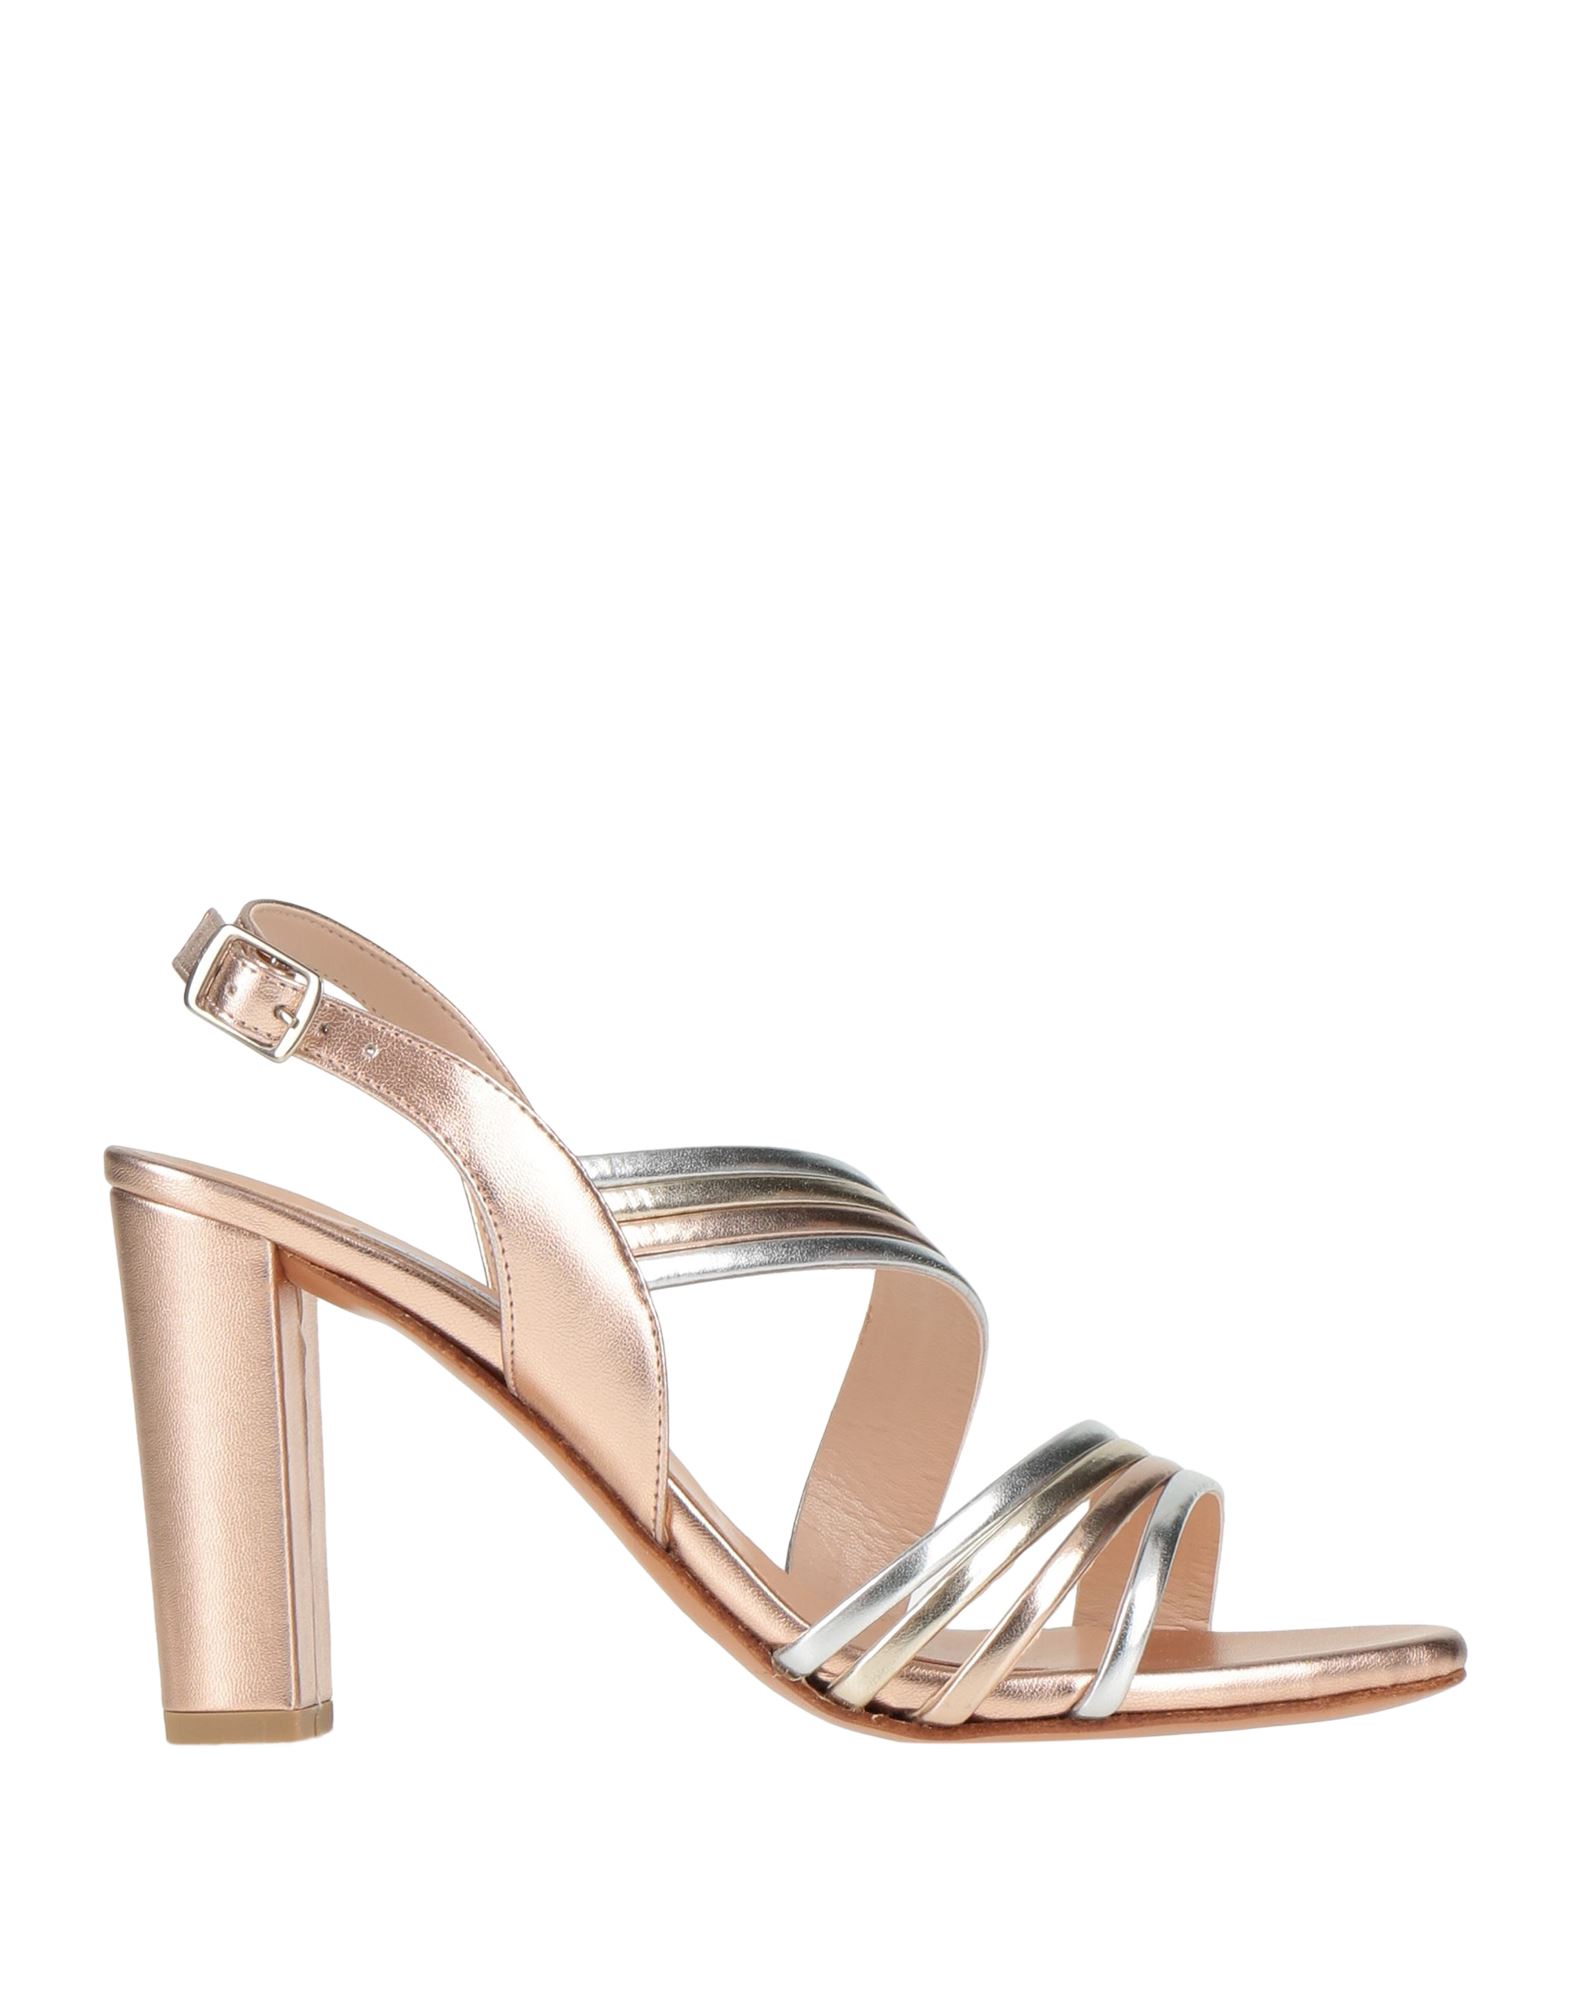 L'amour By Albano Sandals In Rose Gold